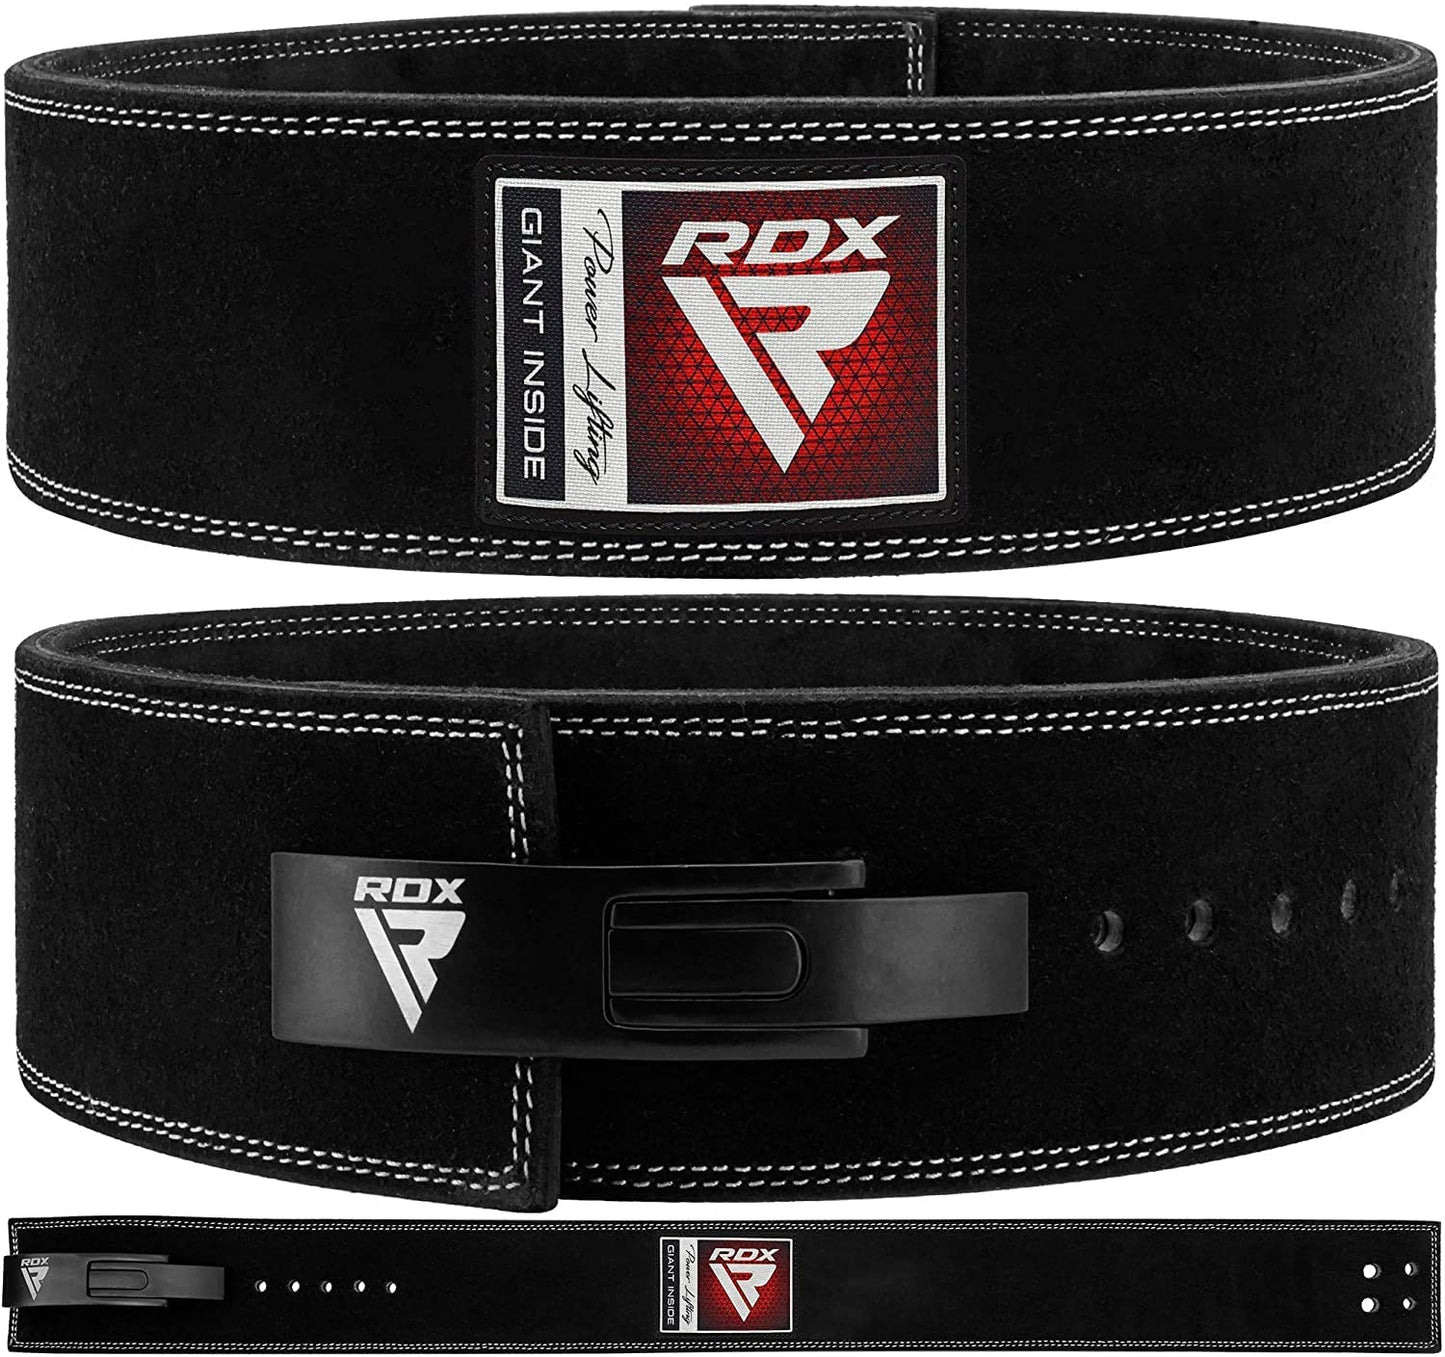 RDX Weight Lifting Belt for Powerlifting - Approved by IPL and USPA - Lever Buckle Gym Training Leather Belt 10mm Thick 4 inch Lumbar Back Support-Great for Strongman, Bodybuilding, Deadlifts & Squat